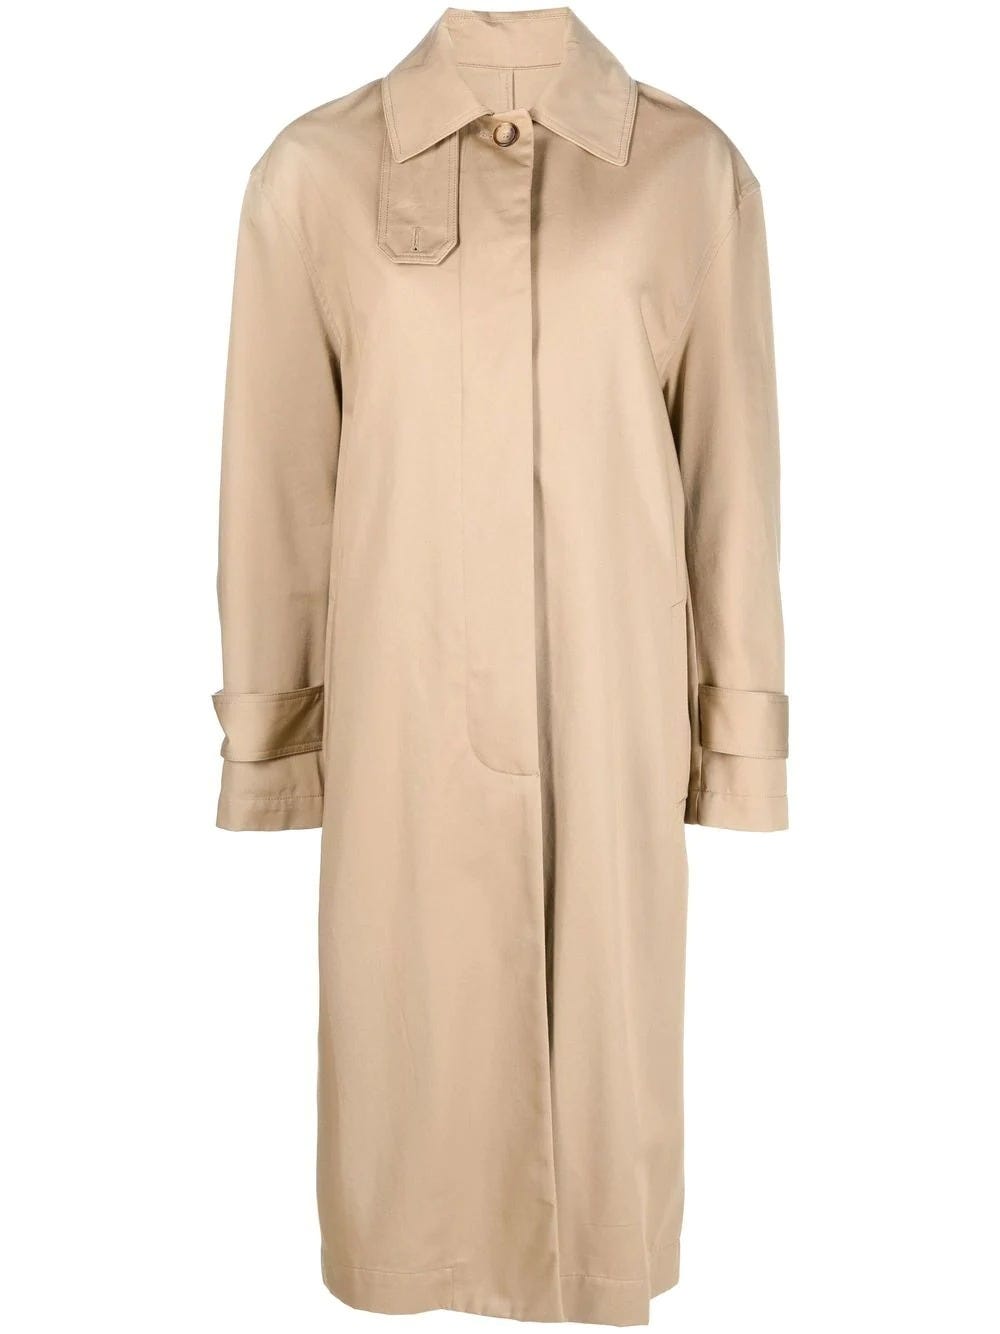 TOTÊME BEIGE TRENCH COAT WITH RAISED COLLAR